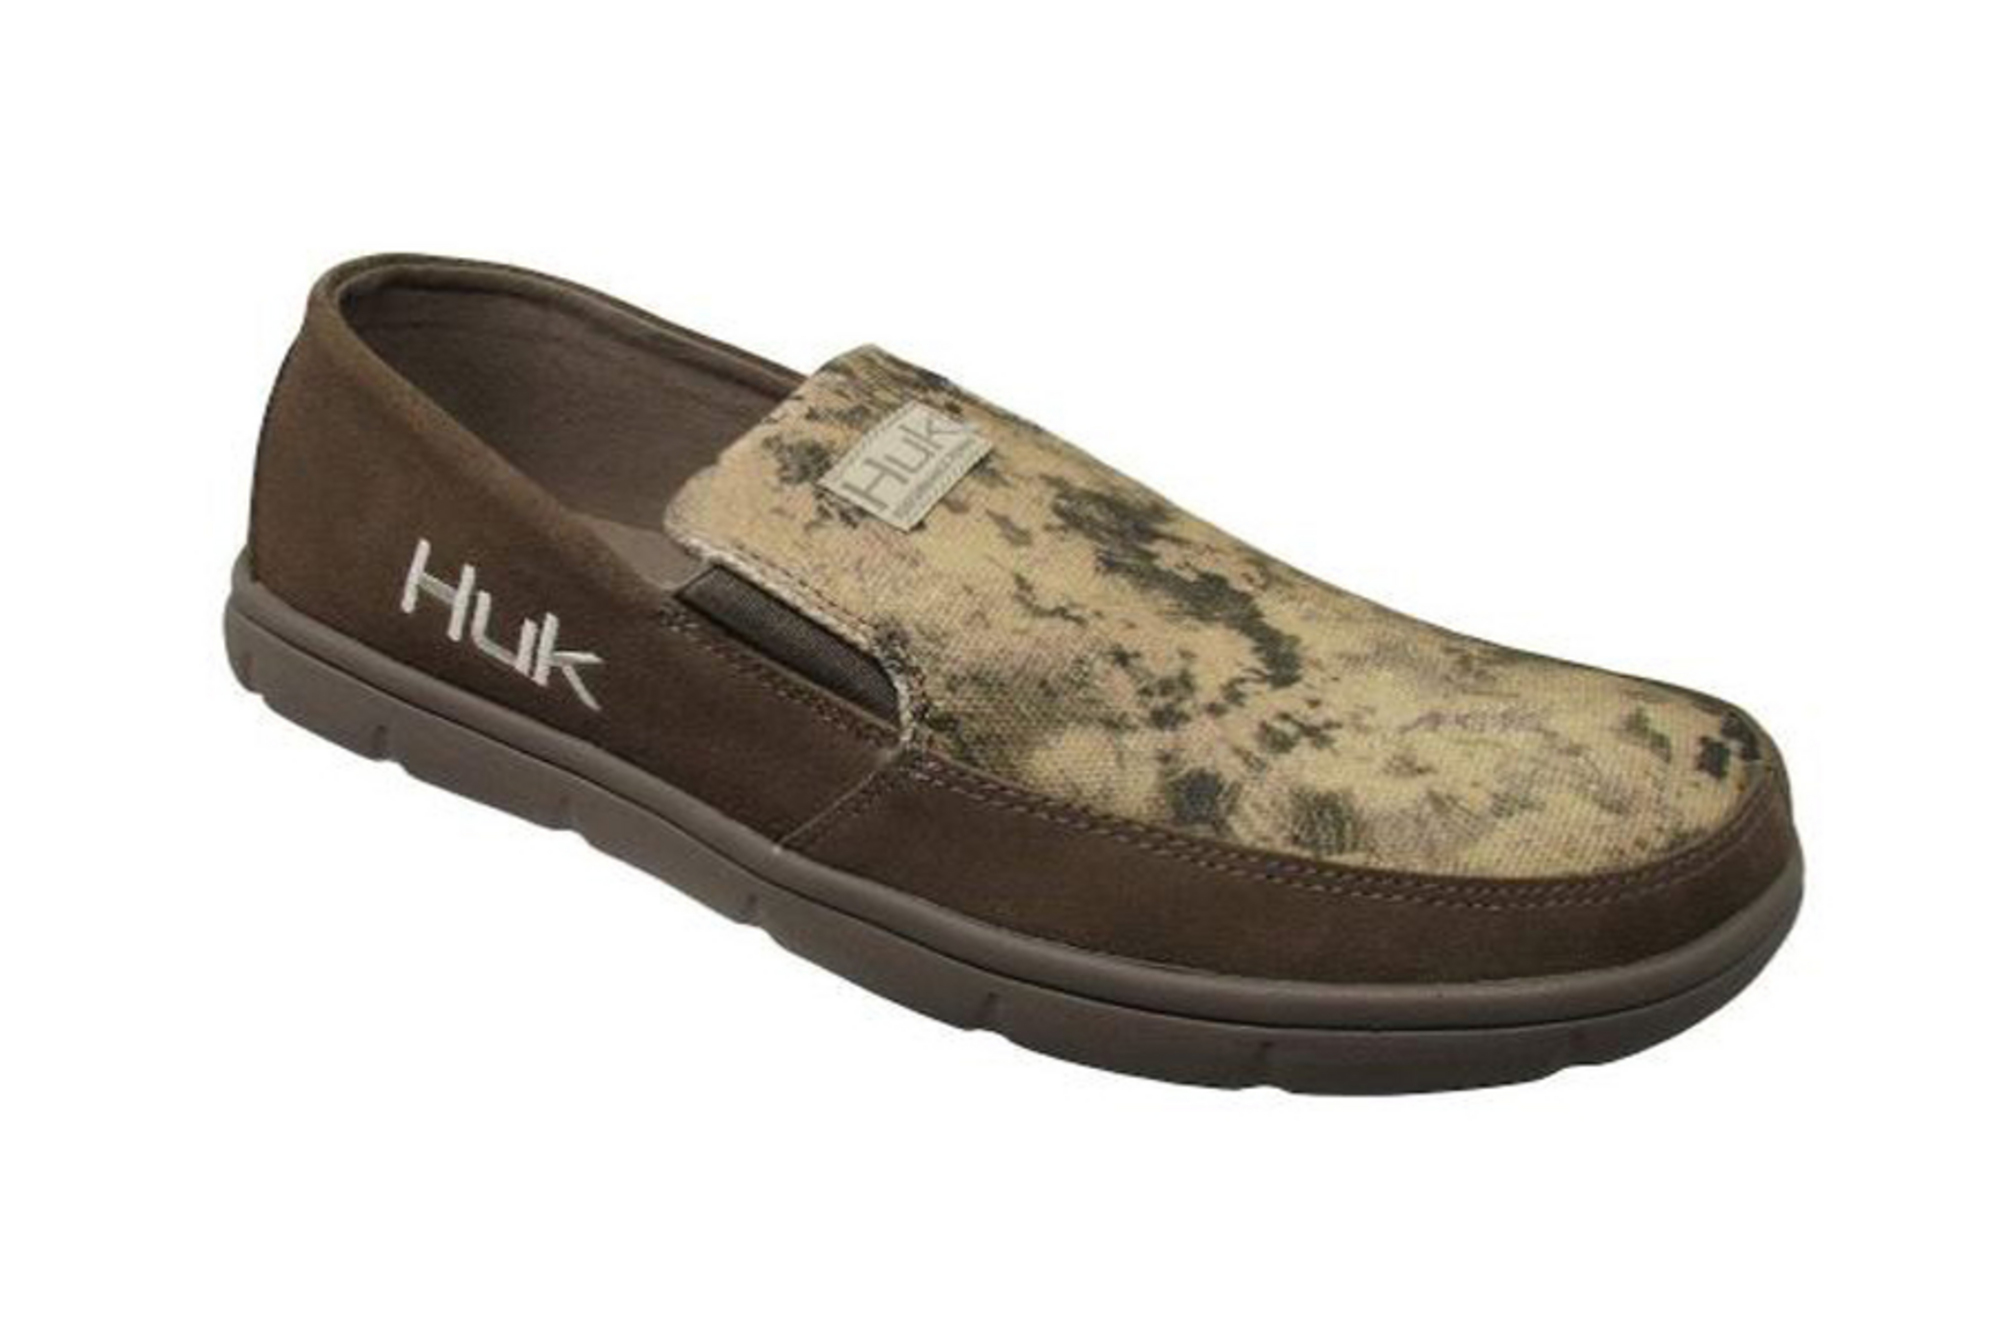 huk shoes for sale